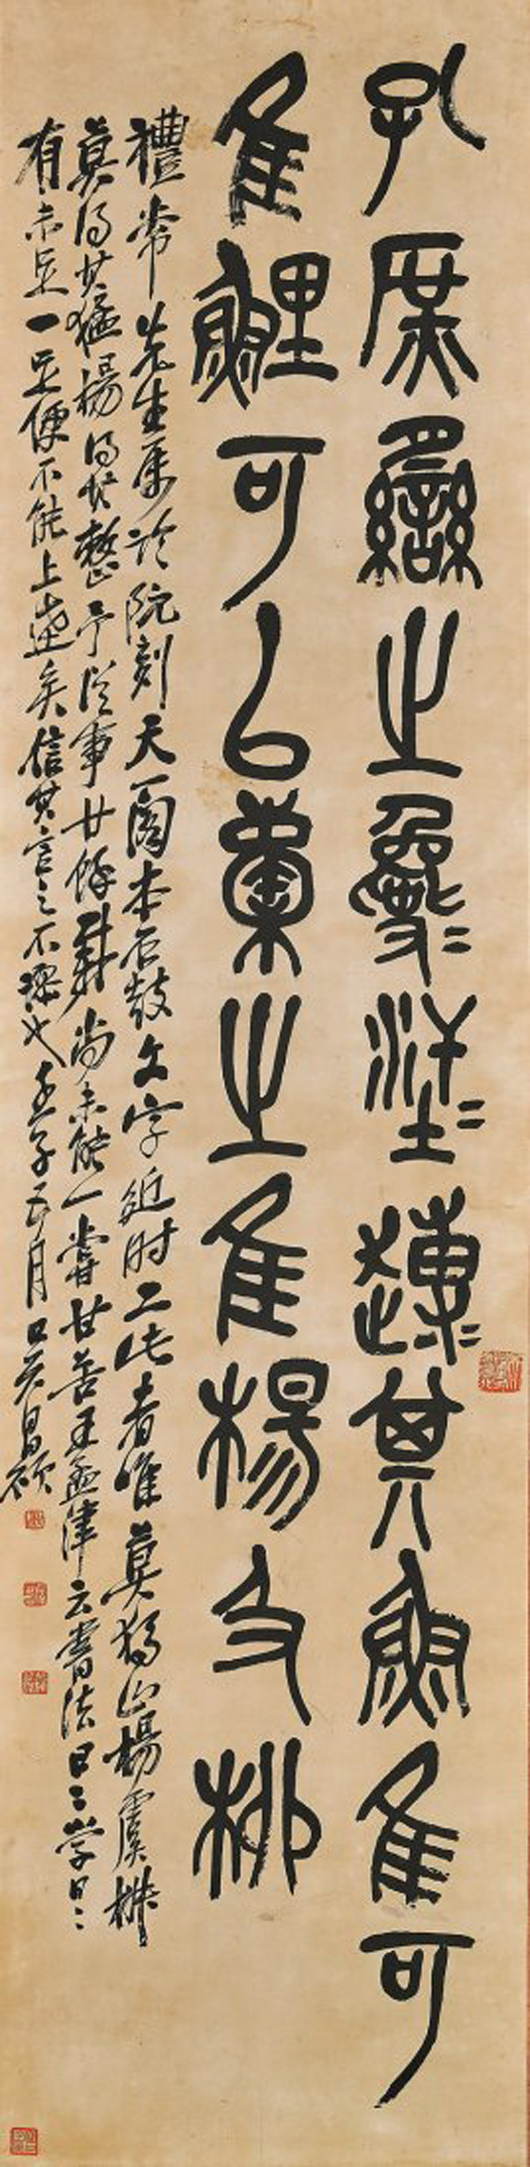 Chinese ink-on-paper calligraphy by Wu Changshuo (1844-1927), signed with four seals of the artist and one collector’s seal of Chongsog (Pyong-U-Min), $73,200. I.M. Chait image